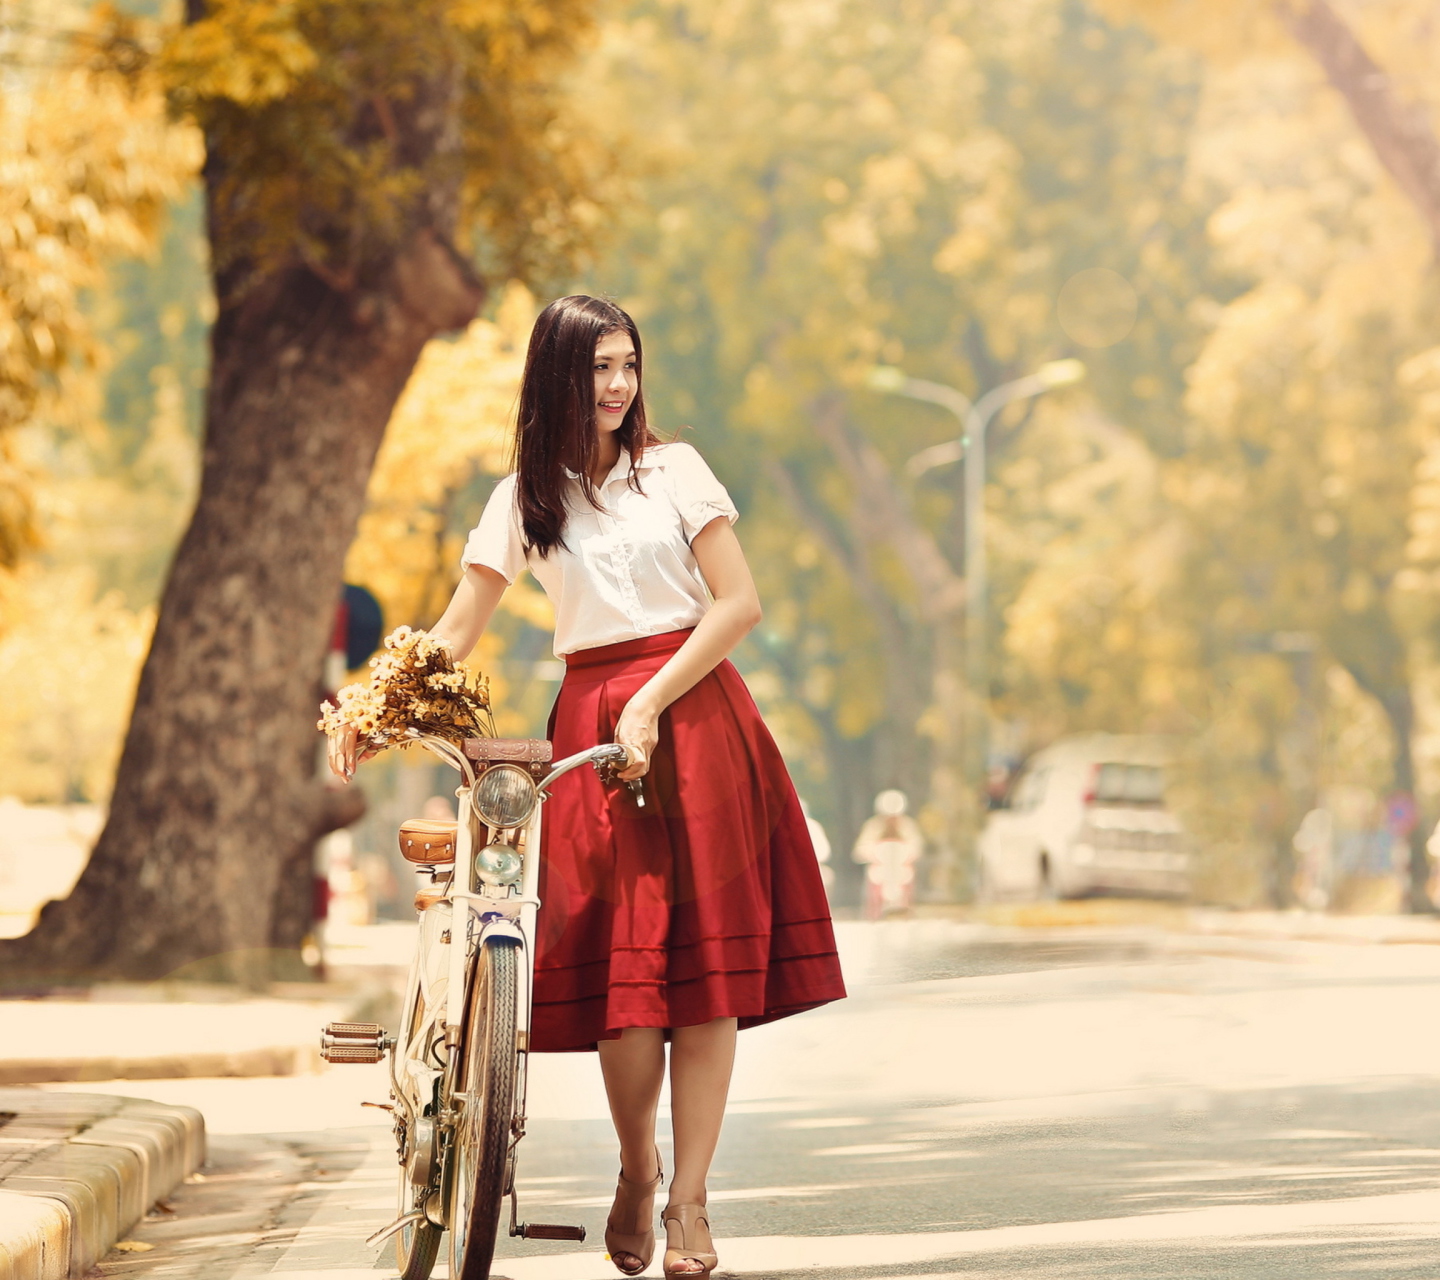 Das Romantic Girl With Bicycle And Flowers Wallpaper 1440x1280